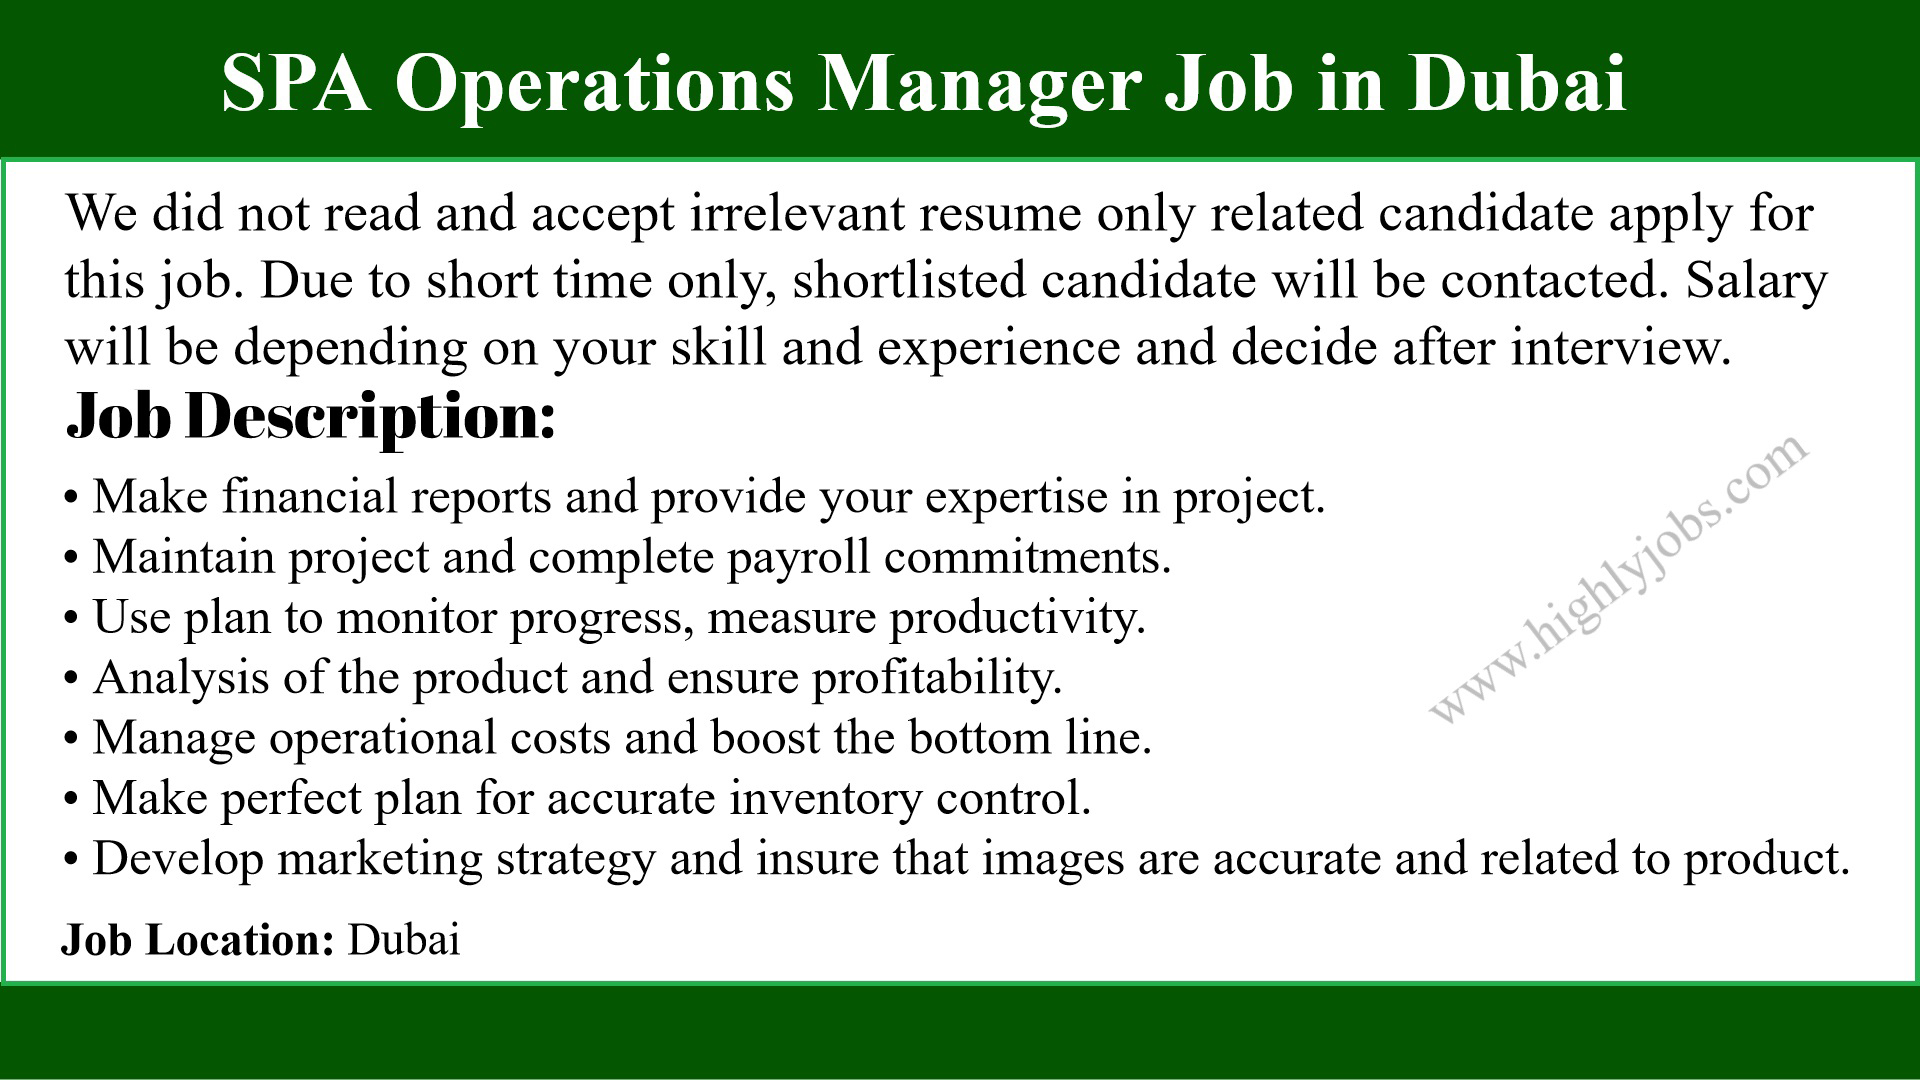 SPA Operations Manager Job in Dubai